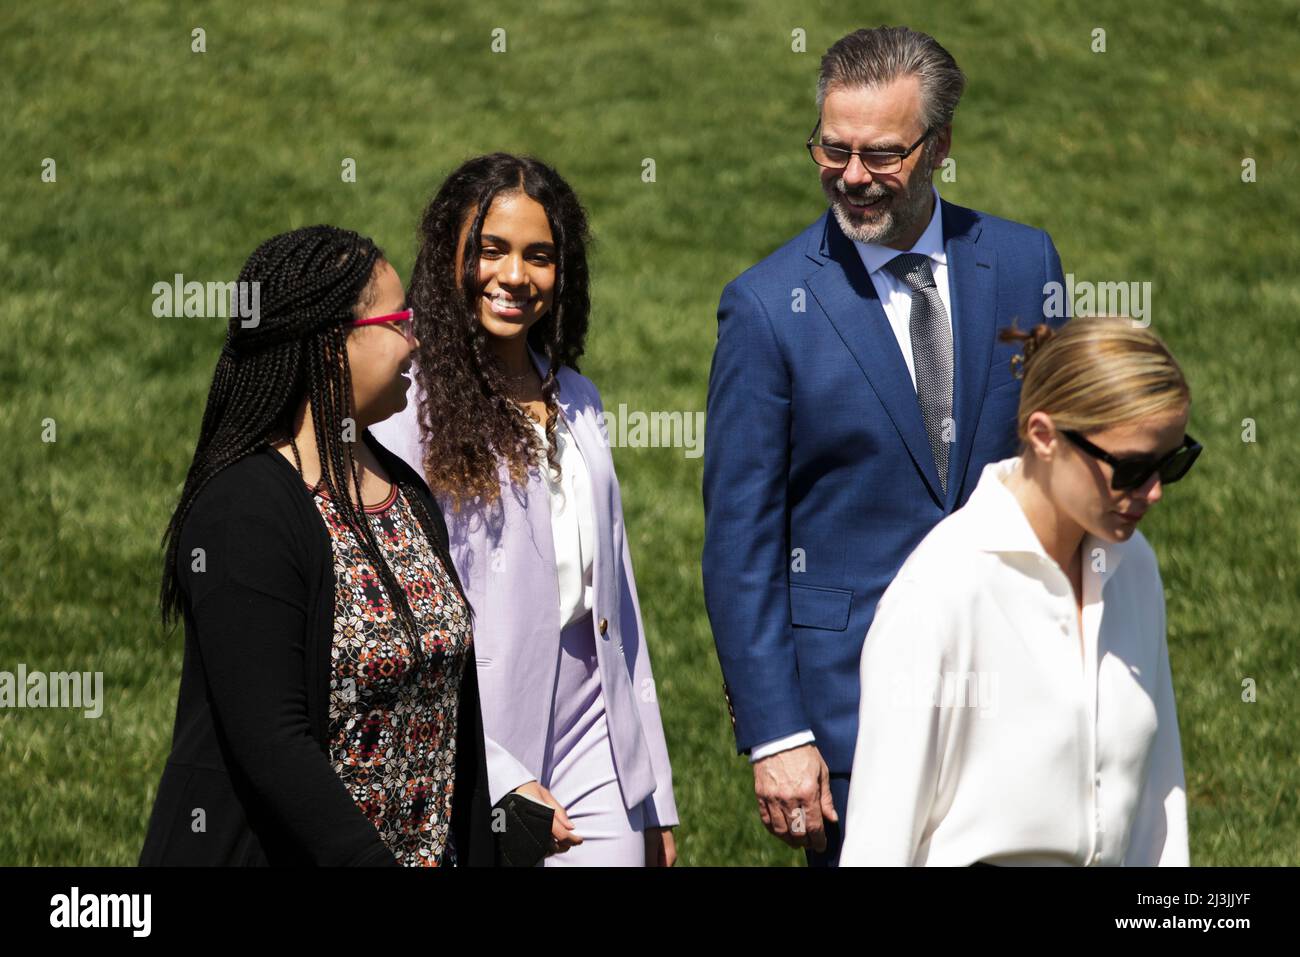 Washington, USA. 08th Apr, 2022. President Joe Biden's granddaughter Naomi Biden, right, arrives with Judge Ketanji Brown Jackson's family, from left, daughters Talia Jackson and Leila Jackson and husband Patrick Jackson for an event celebrating the judge's confirmation to the U.S. Supreme Court on the South Lawn of the White House on April 8, 2022 in Washington, DC. (Photo by Oliver Contreras/SIPA USA) Credit: Sipa USA/Alamy Live News Stock Photo